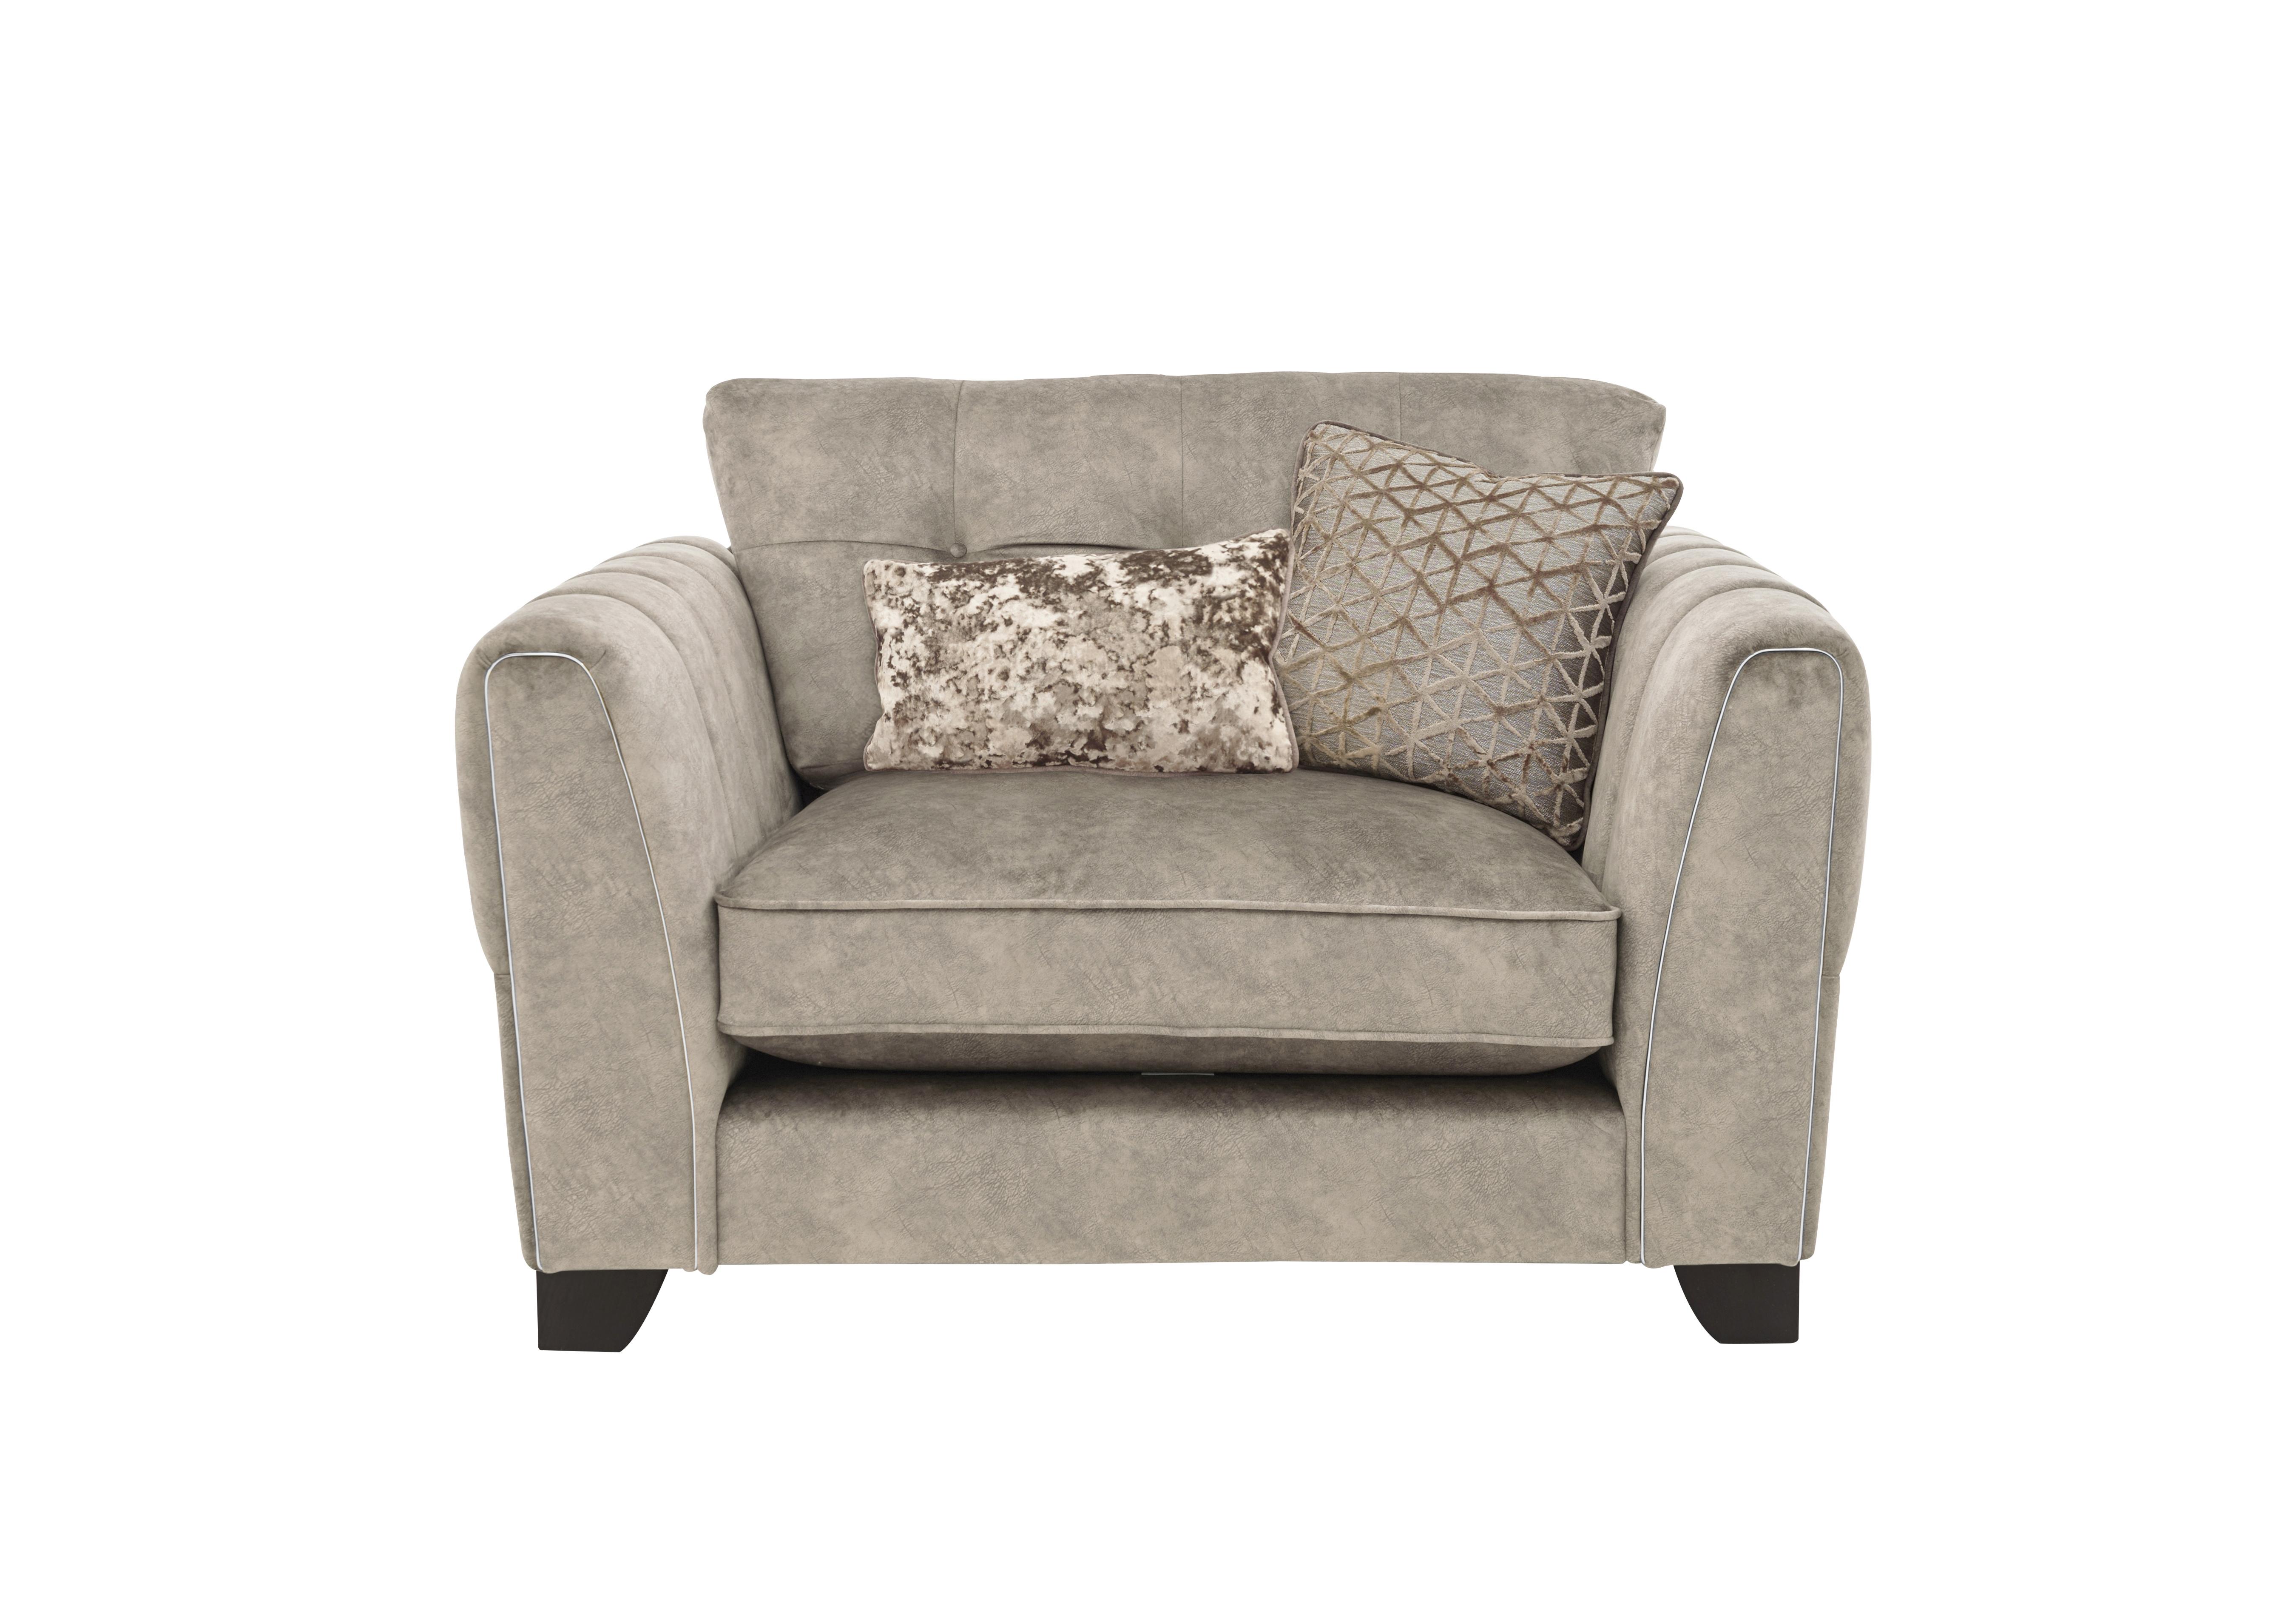 Ariana Classic Back Fabric Snuggler Chair in Dapple Oyster Chrome Insert on Furniture Village